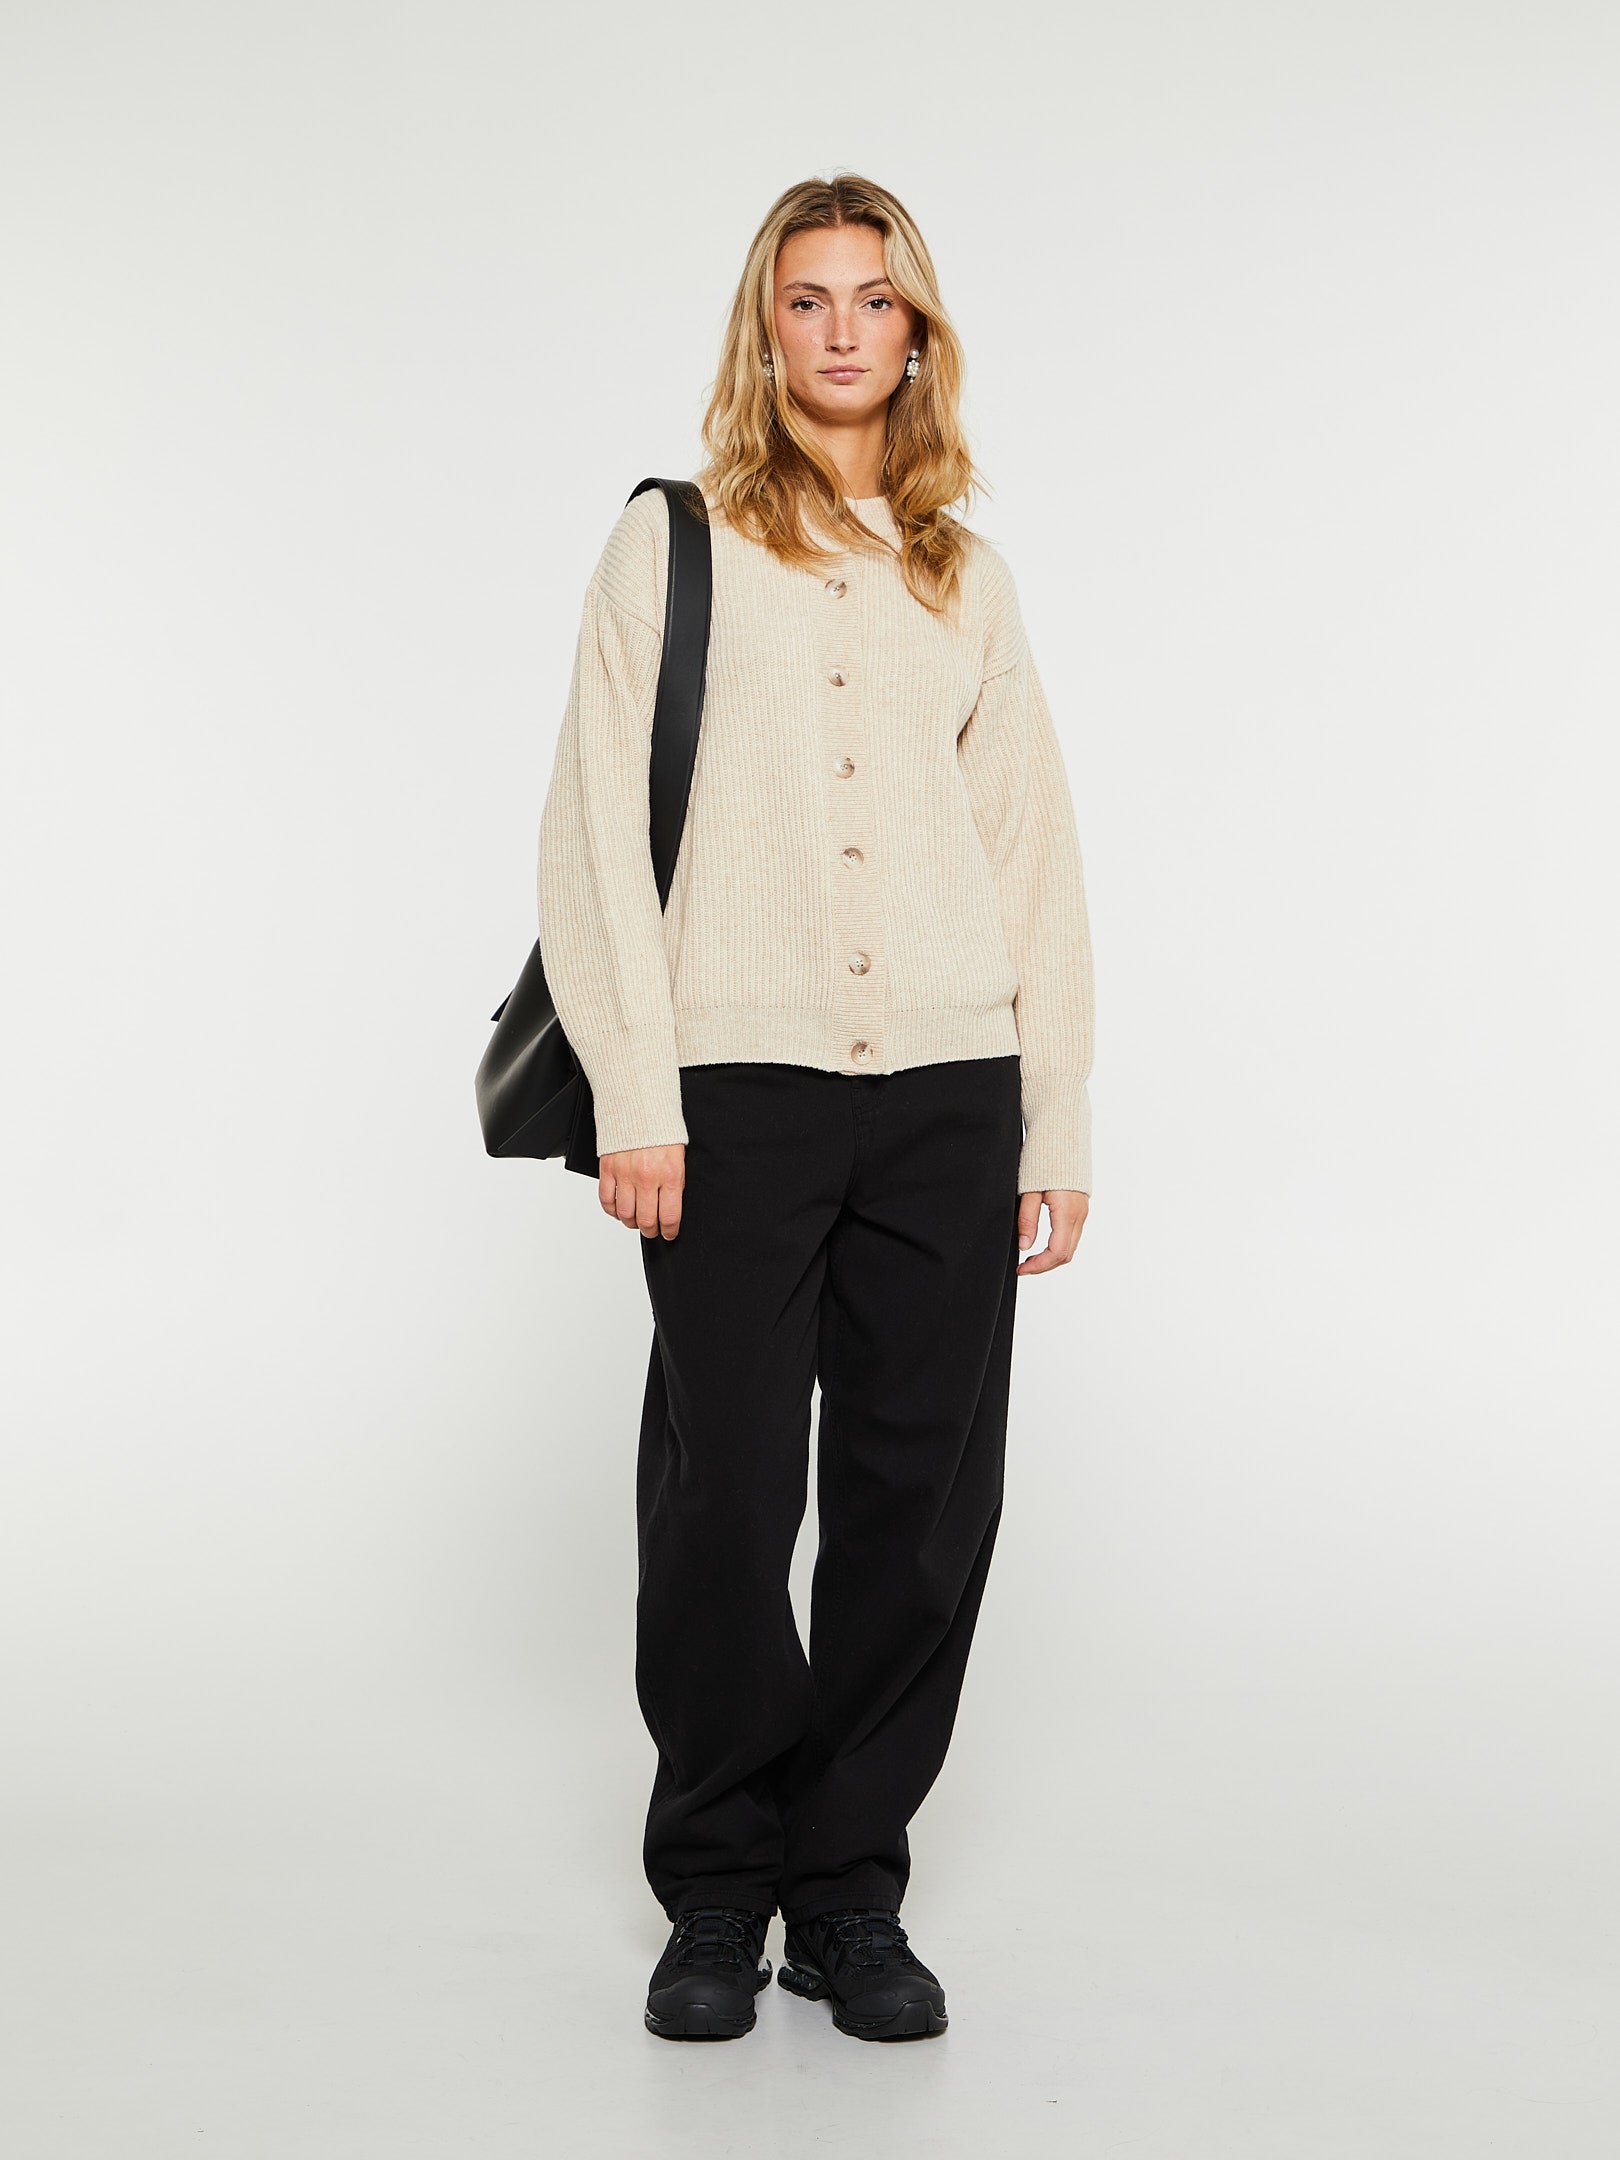 Women's Derby Pant in Black Garment Dyed